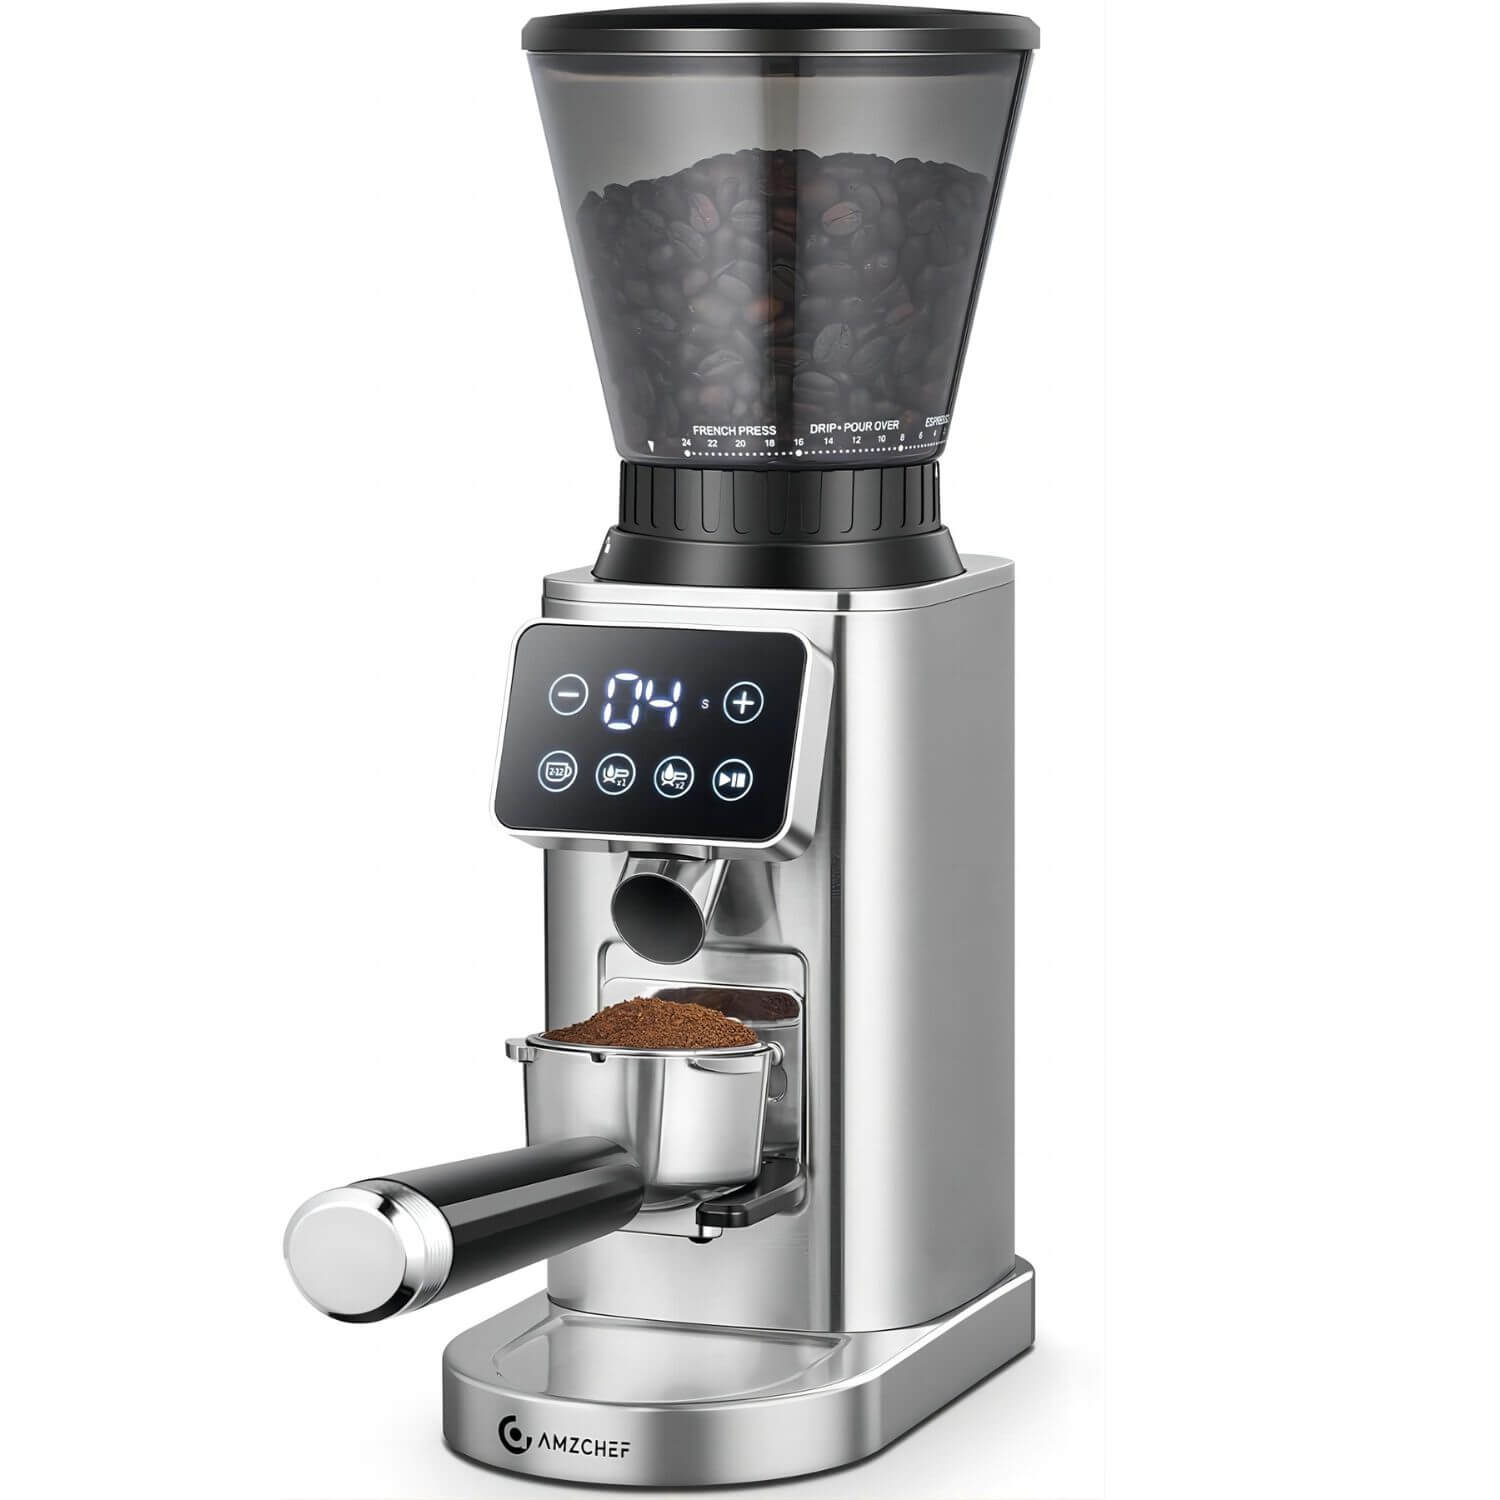 AMZCHEF Coffee Bean Grinder With Detachable Funnel Stand